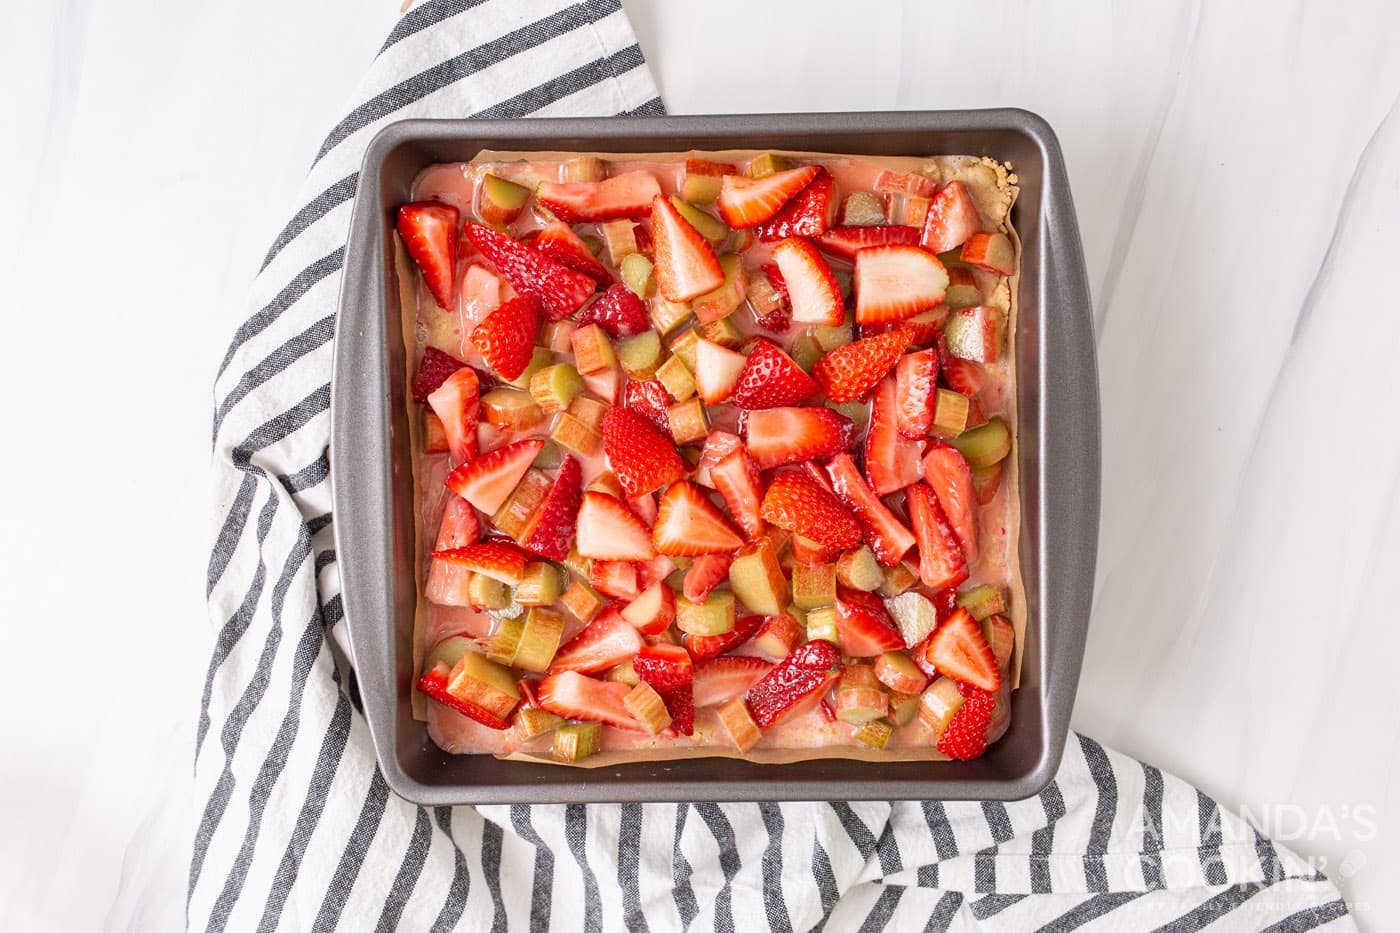 strawberries and rhubarb on top of crust in a pan